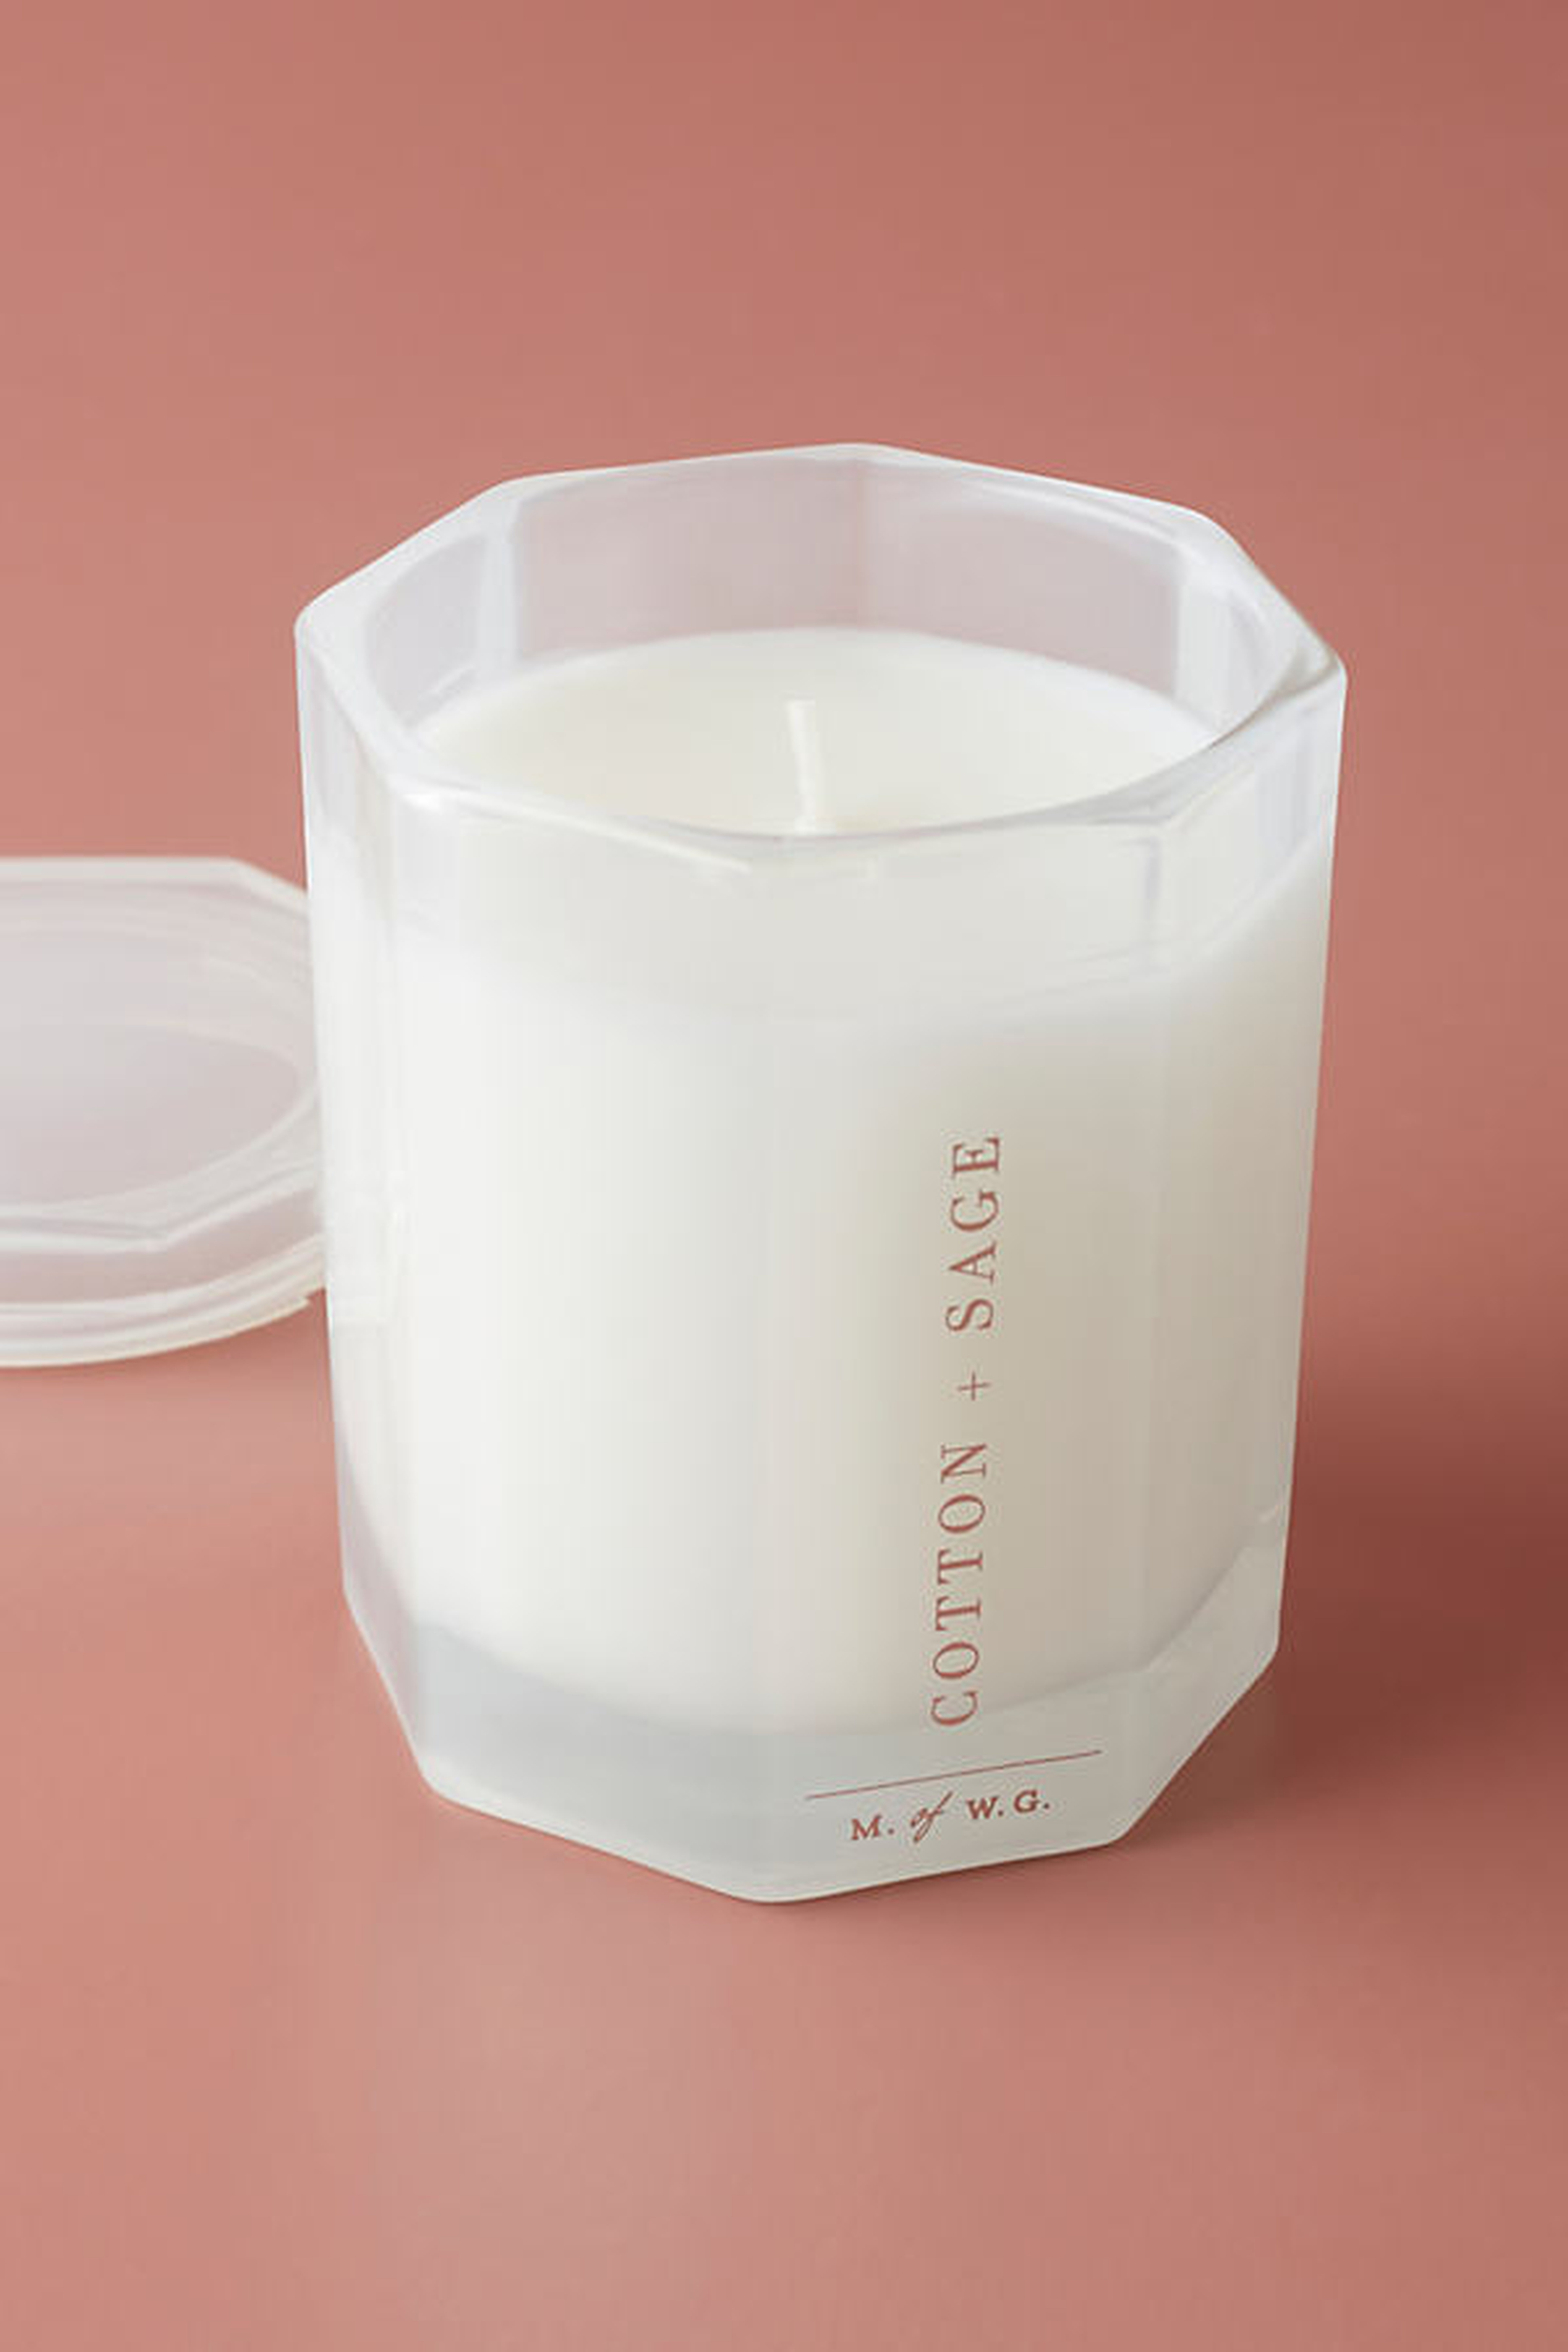 Makers of Wax Goods Octagonal Glass Candle By Makers of Wax Goods in White - Anthropologie